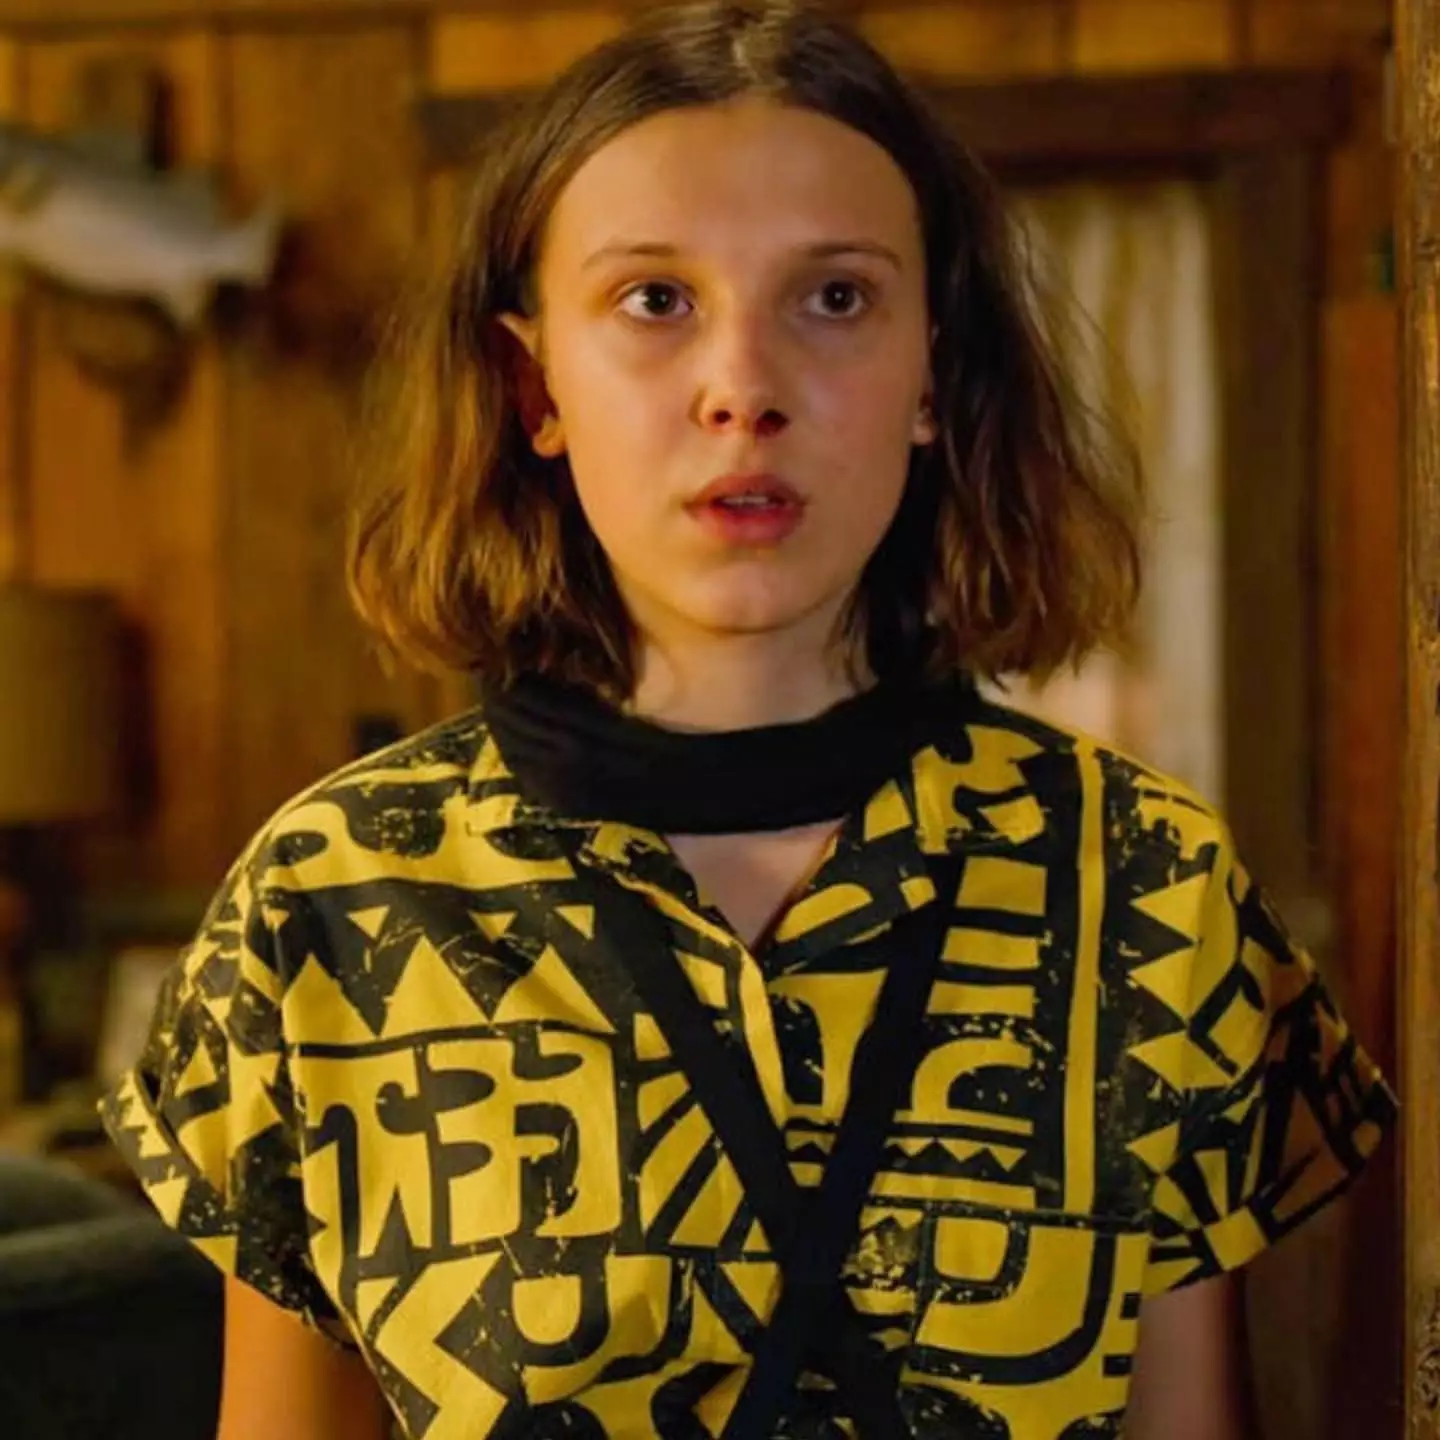 Millie Bobby Brown is best known for starring in 'Stranger Things' (